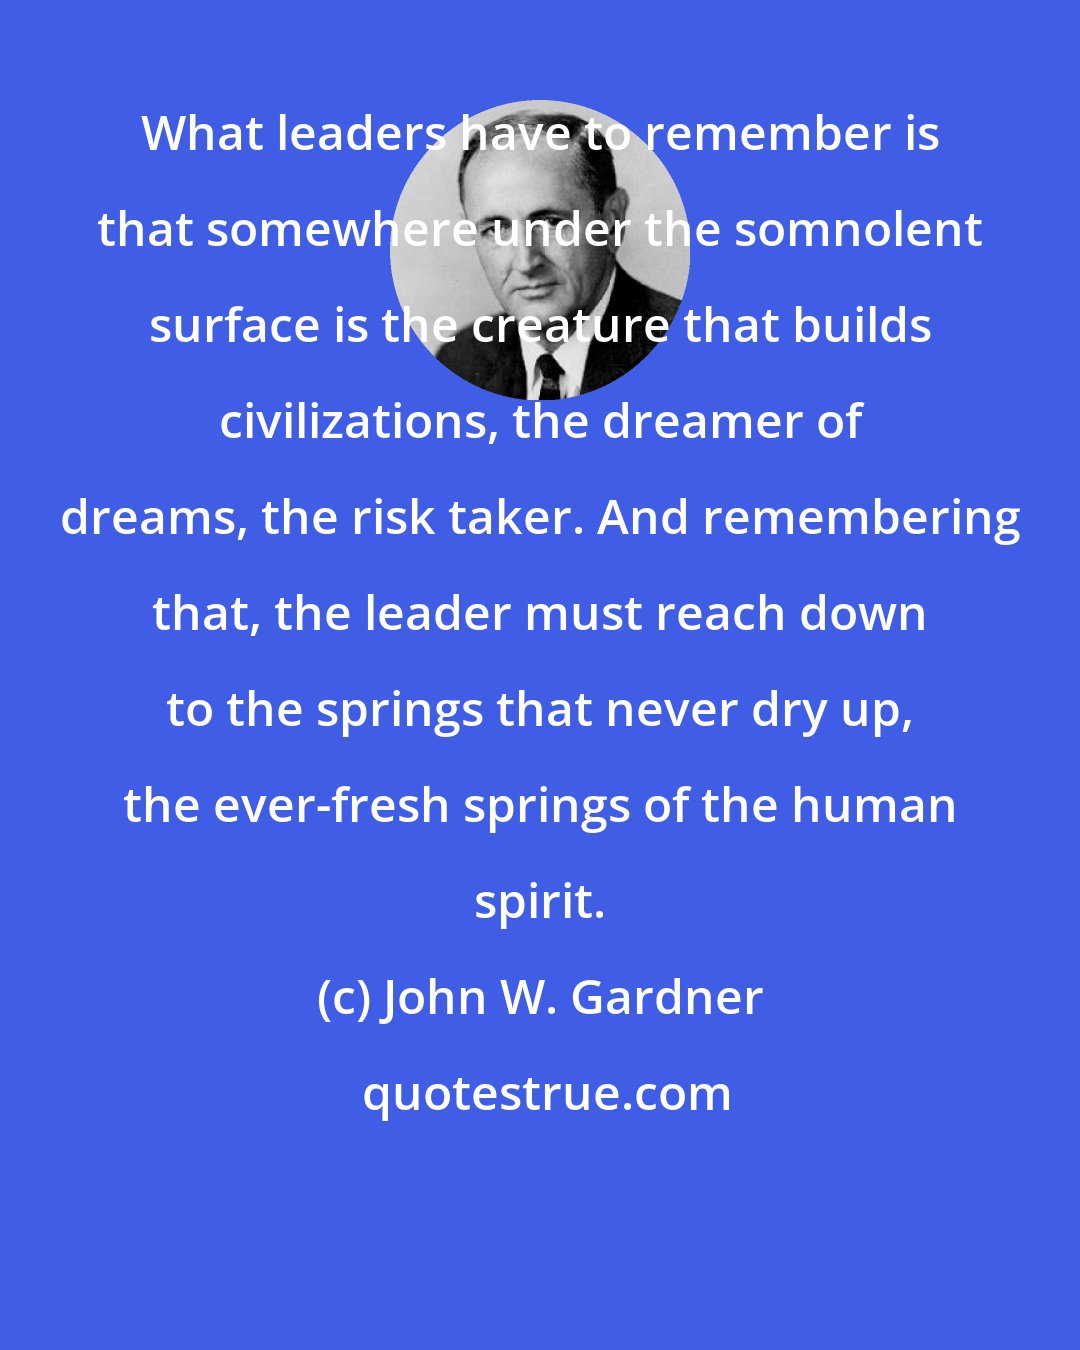 John W. Gardner: What leaders have to remember is that somewhere under the somnolent surface is the creature that builds civilizations, the dreamer of dreams, the risk taker. And remembering that, the leader must reach down to the springs that never dry up, the ever-fresh springs of the human spirit.